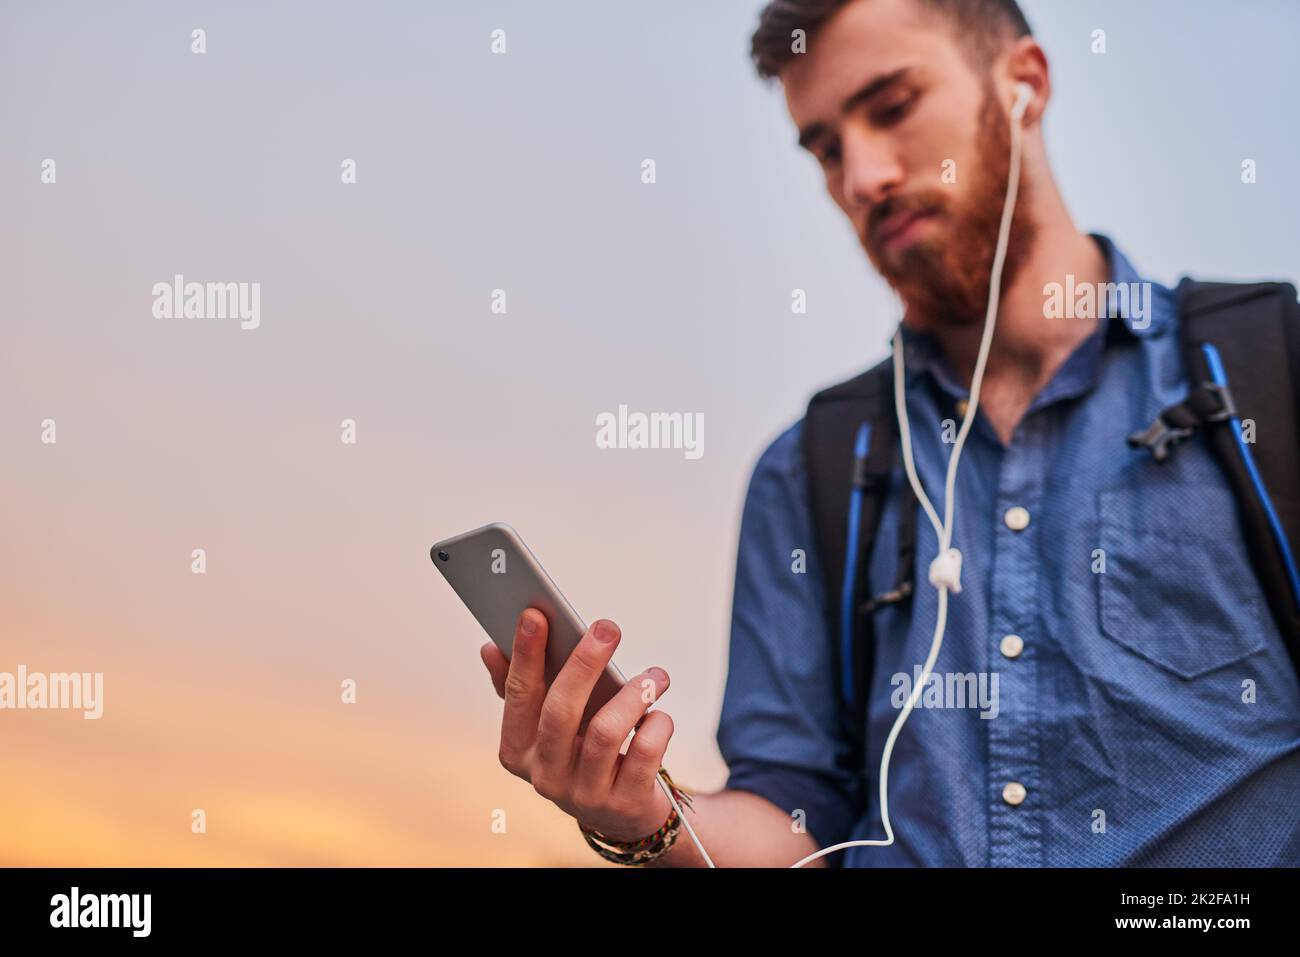 Everything he needs is right in his hand. Low angle shot of a handsome young man listening to music on his cellphone while walking through the city. Stock Photo